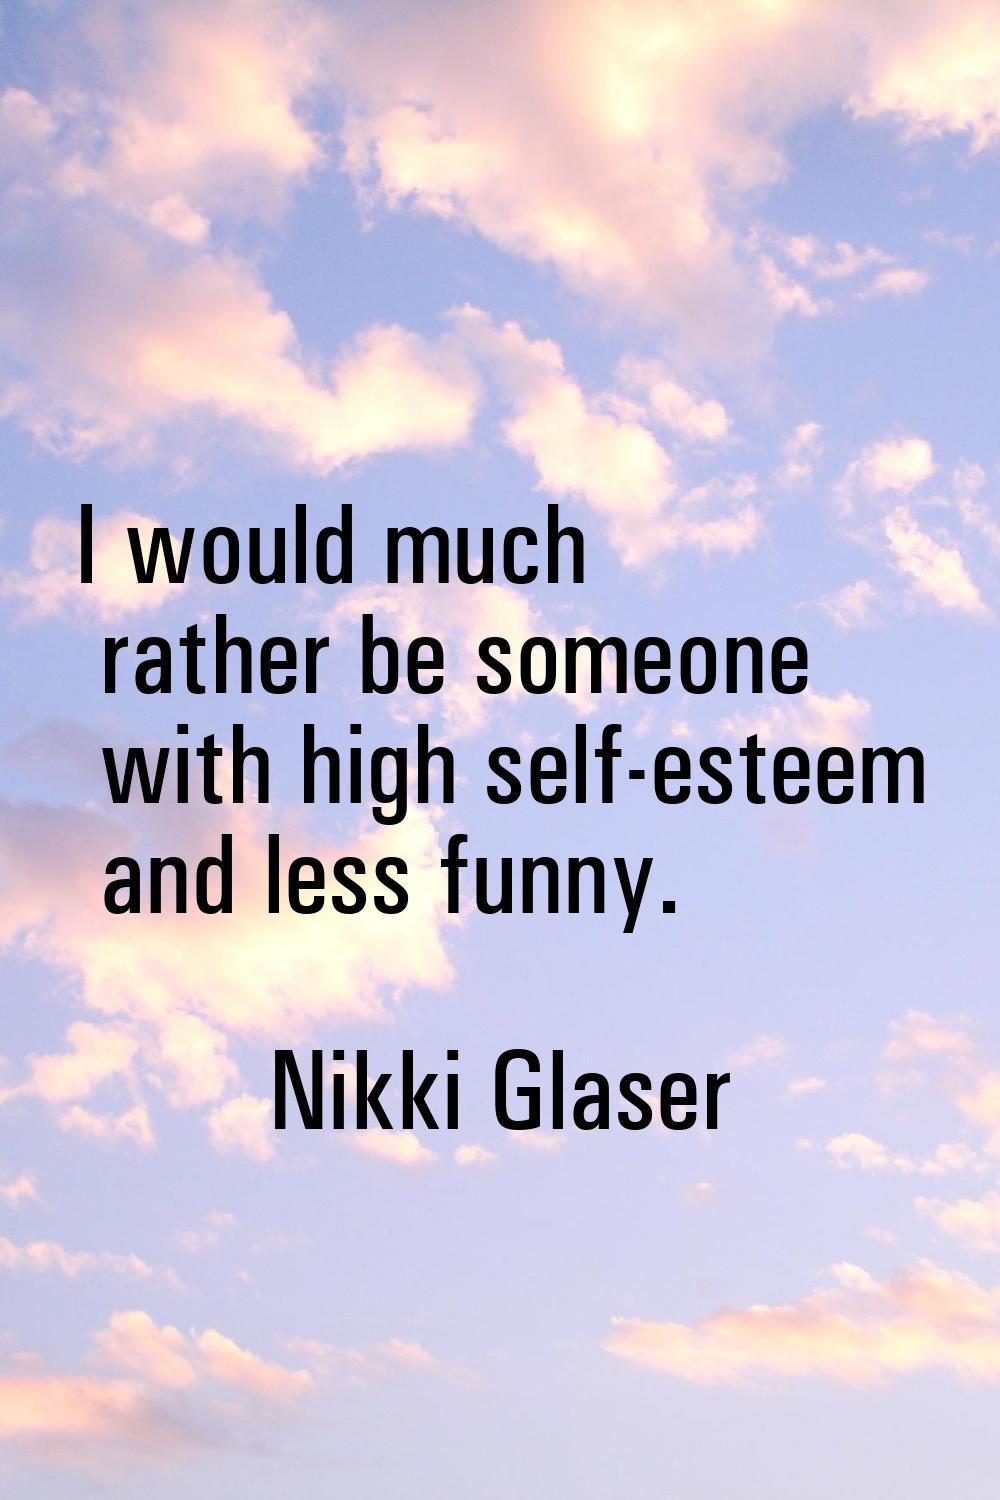 I would much rather be someone with high self-esteem and less funny.